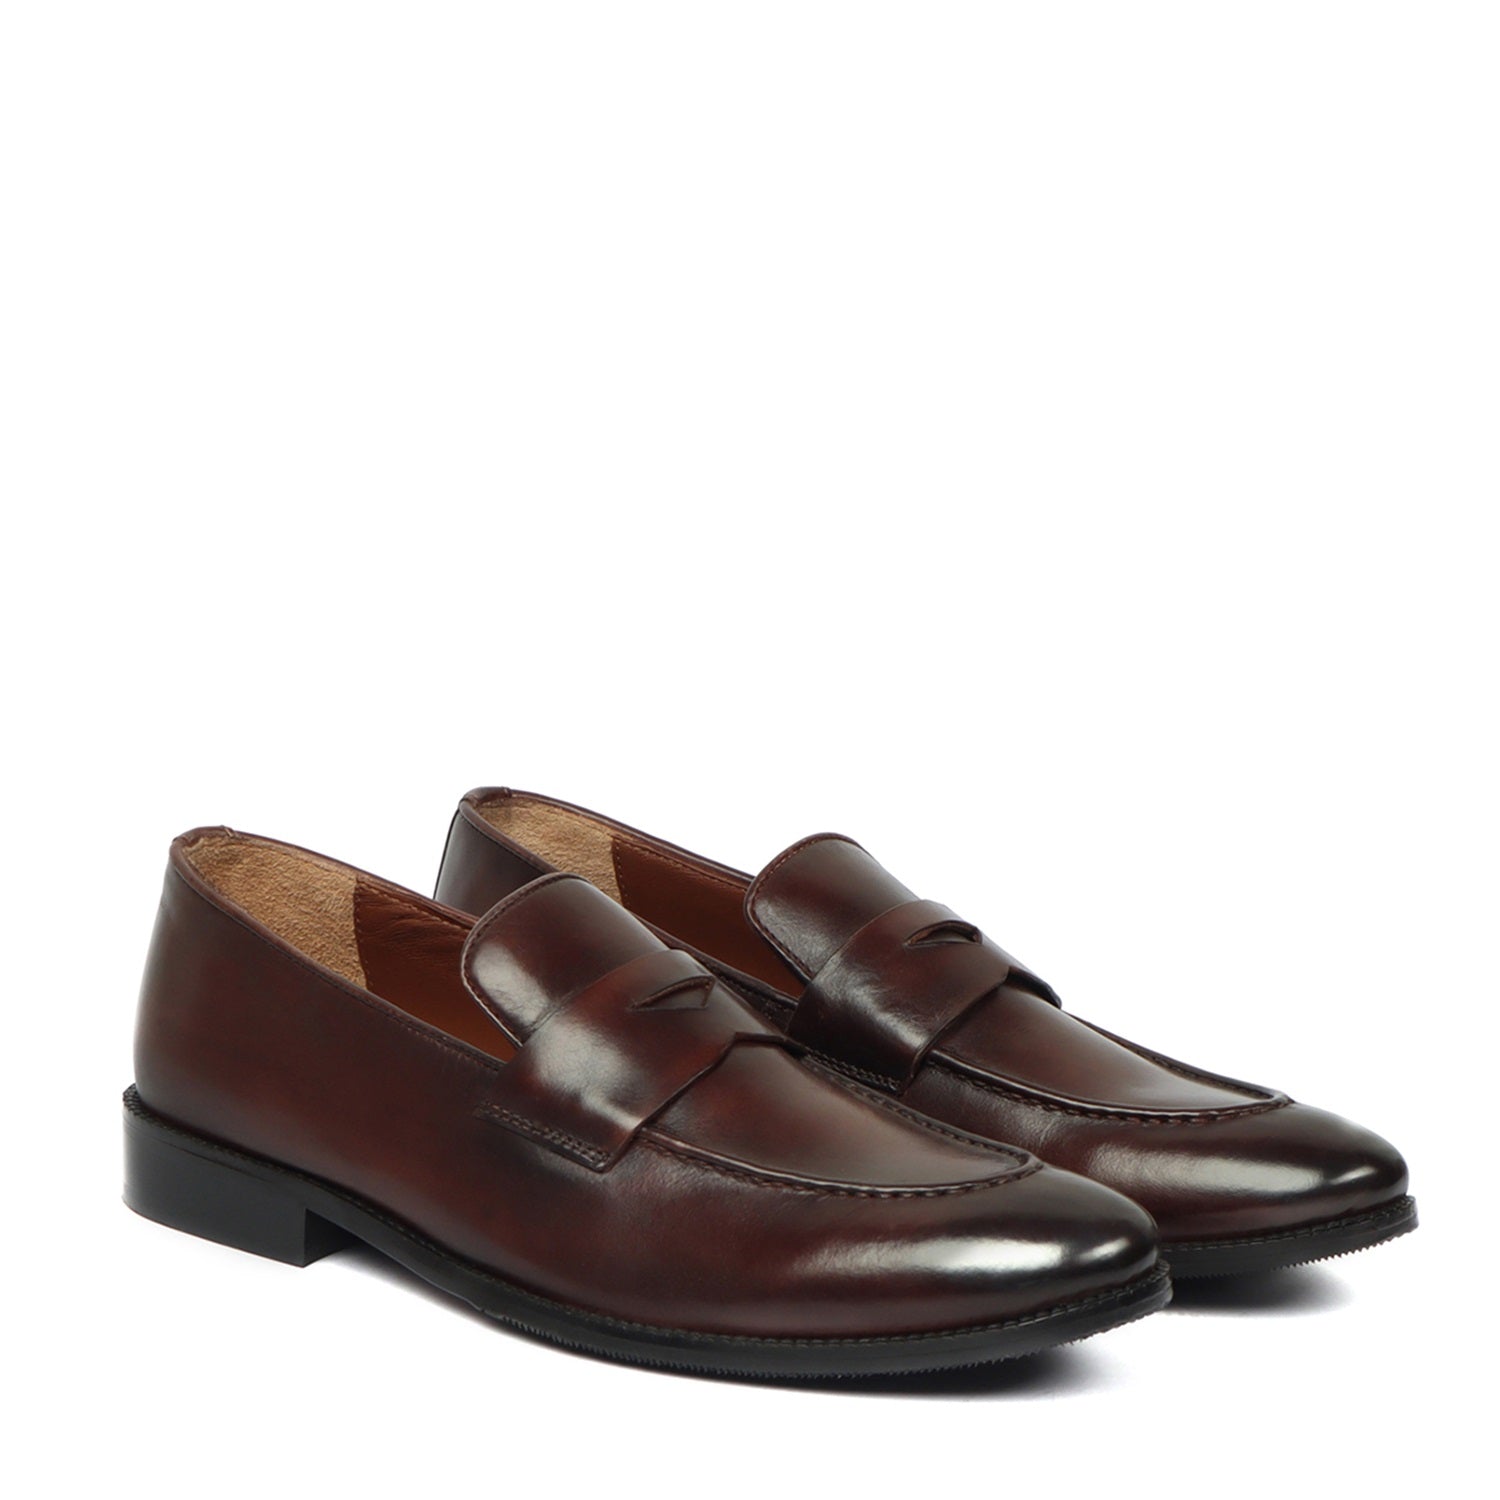 Dark Brown Burnished Leather Penny Loafers with Triangular Cut-Strap By Brune & Bareskin